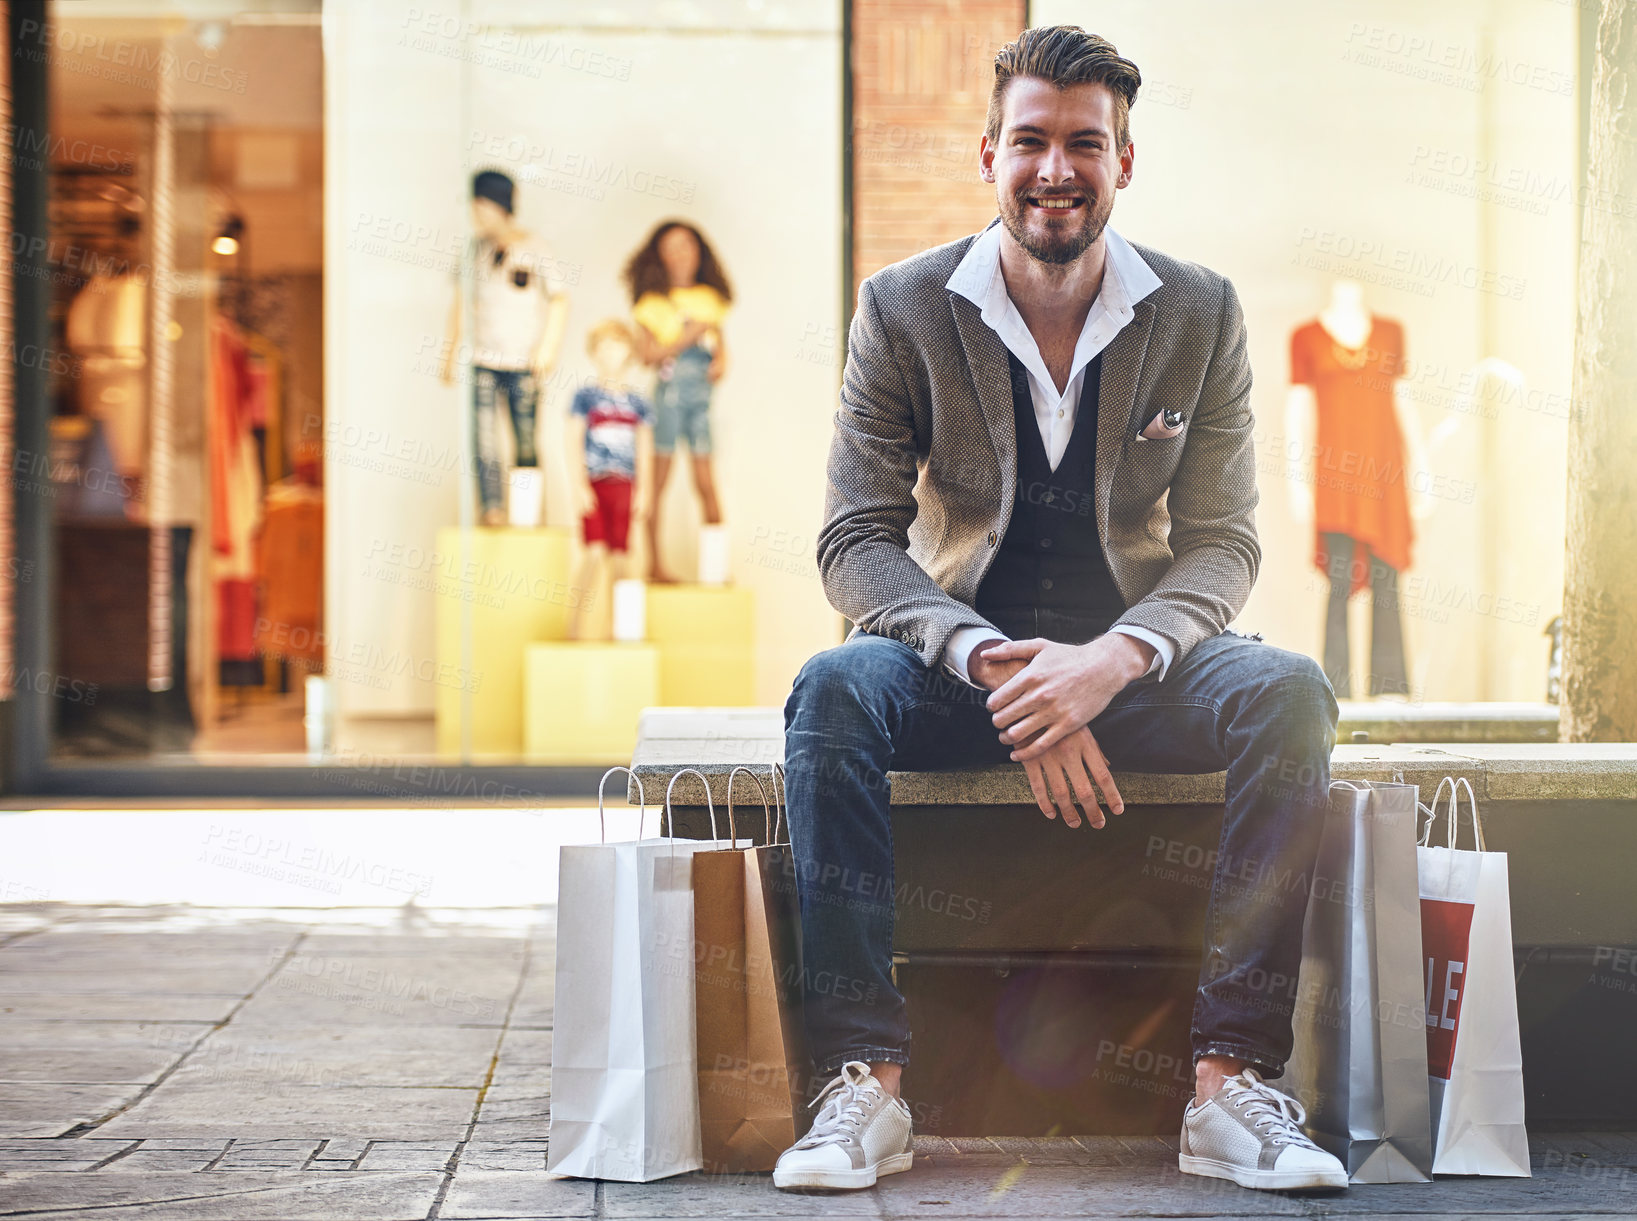 Buy stock photo Shot of a man sitting on a bench with his shopping bags on the floor